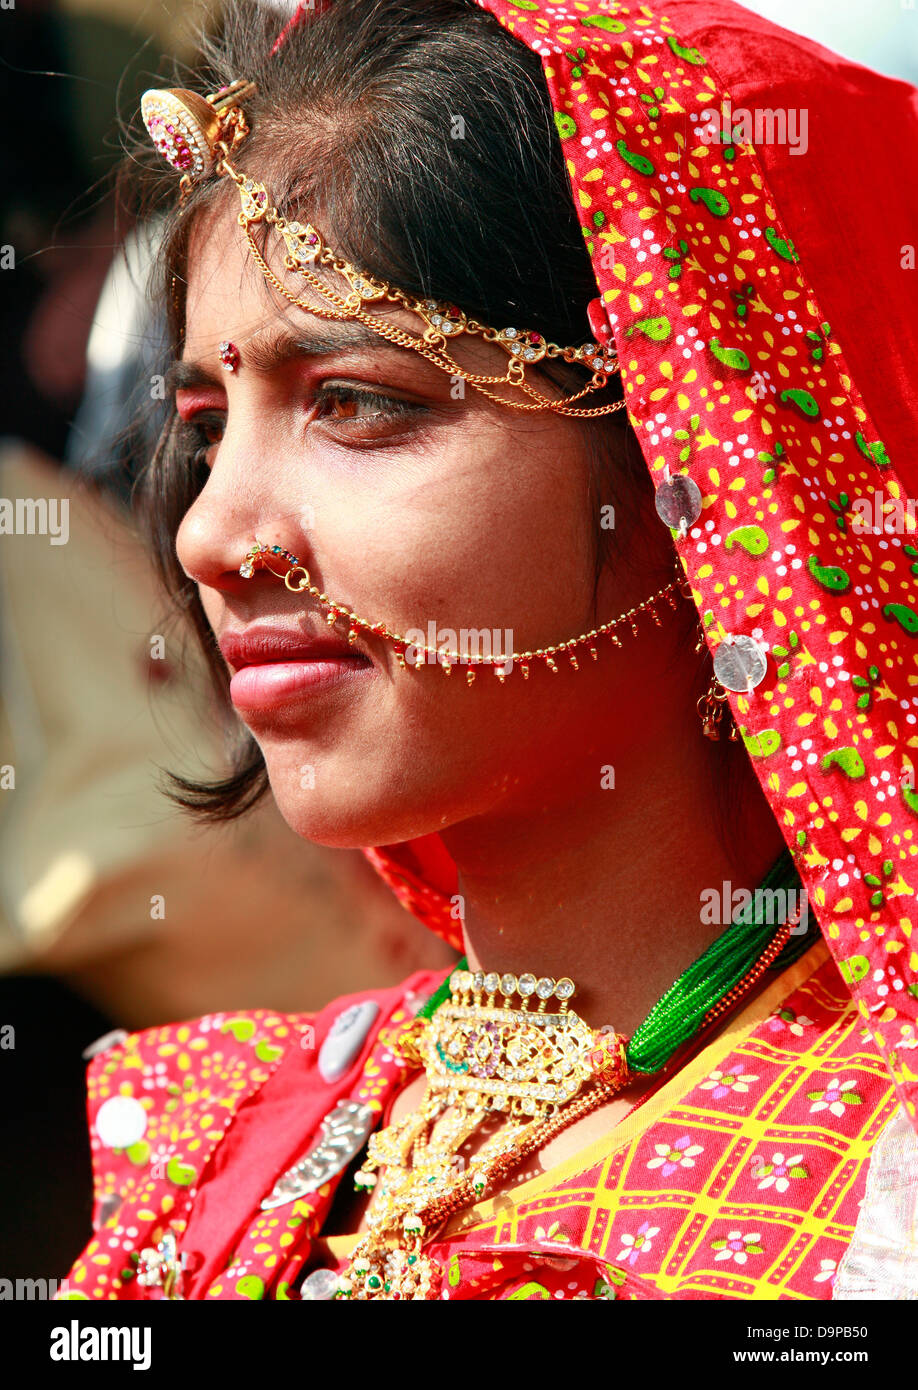 Free Photos - A Woman Wearing A Green Indian Dress, Possibly A Bridal  Outfit, Complete With Traditional Jewelry And Accessories. She Has Her Hair  Styled In A Braid, Enhancing Her Graceful Appearance.